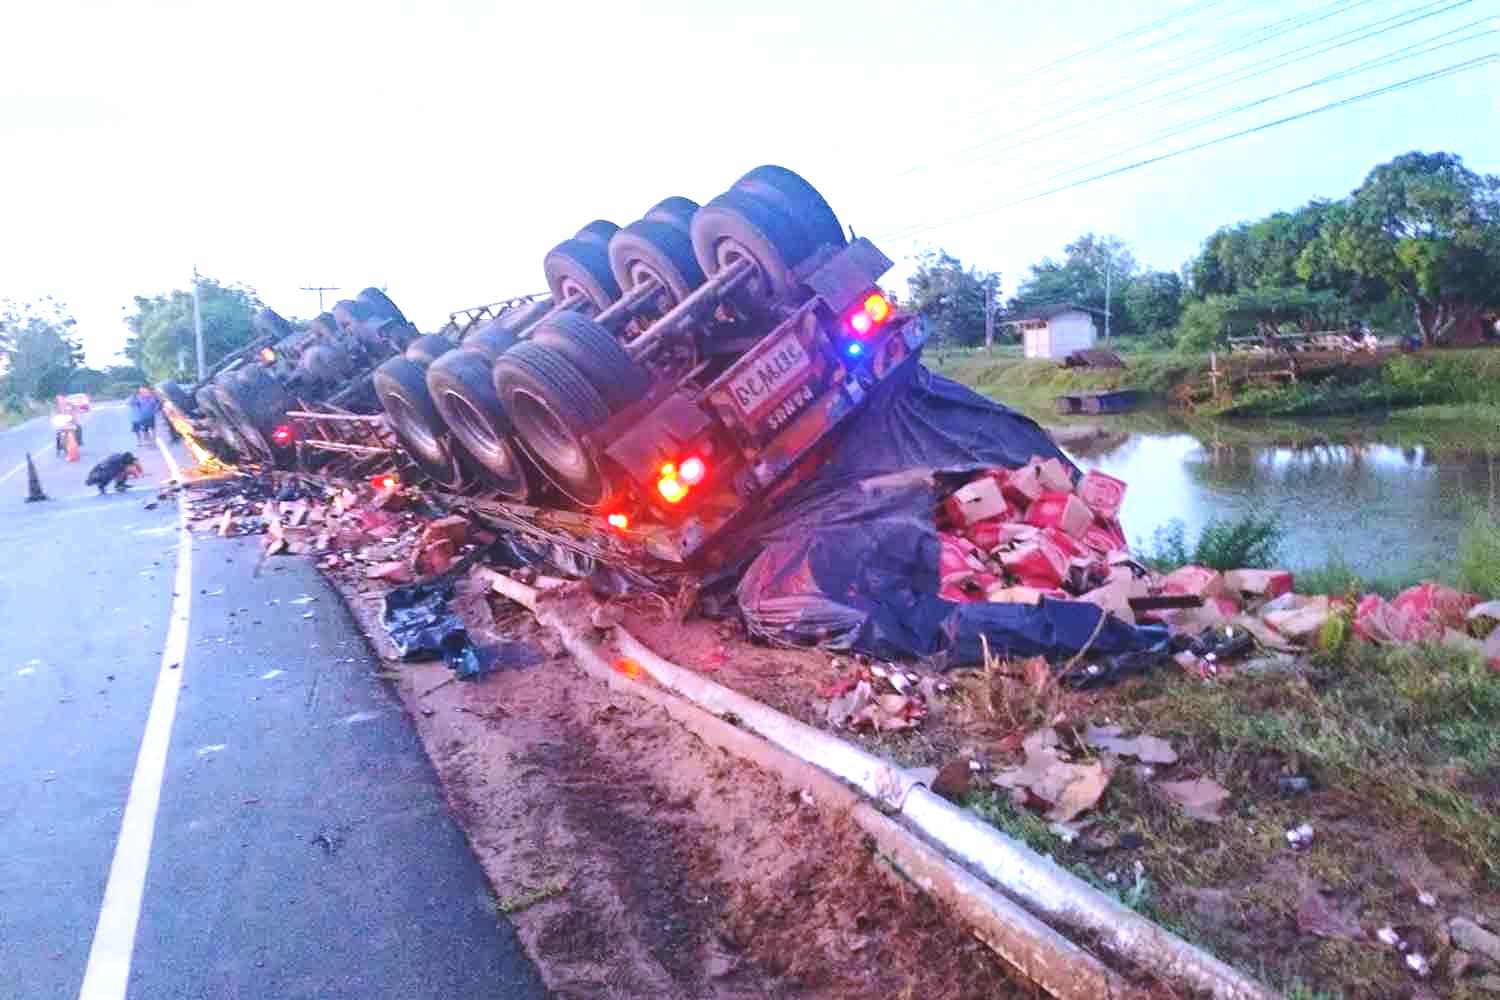 Beer Truck Crashes and Overturns Killing 44 Year-Old Driver